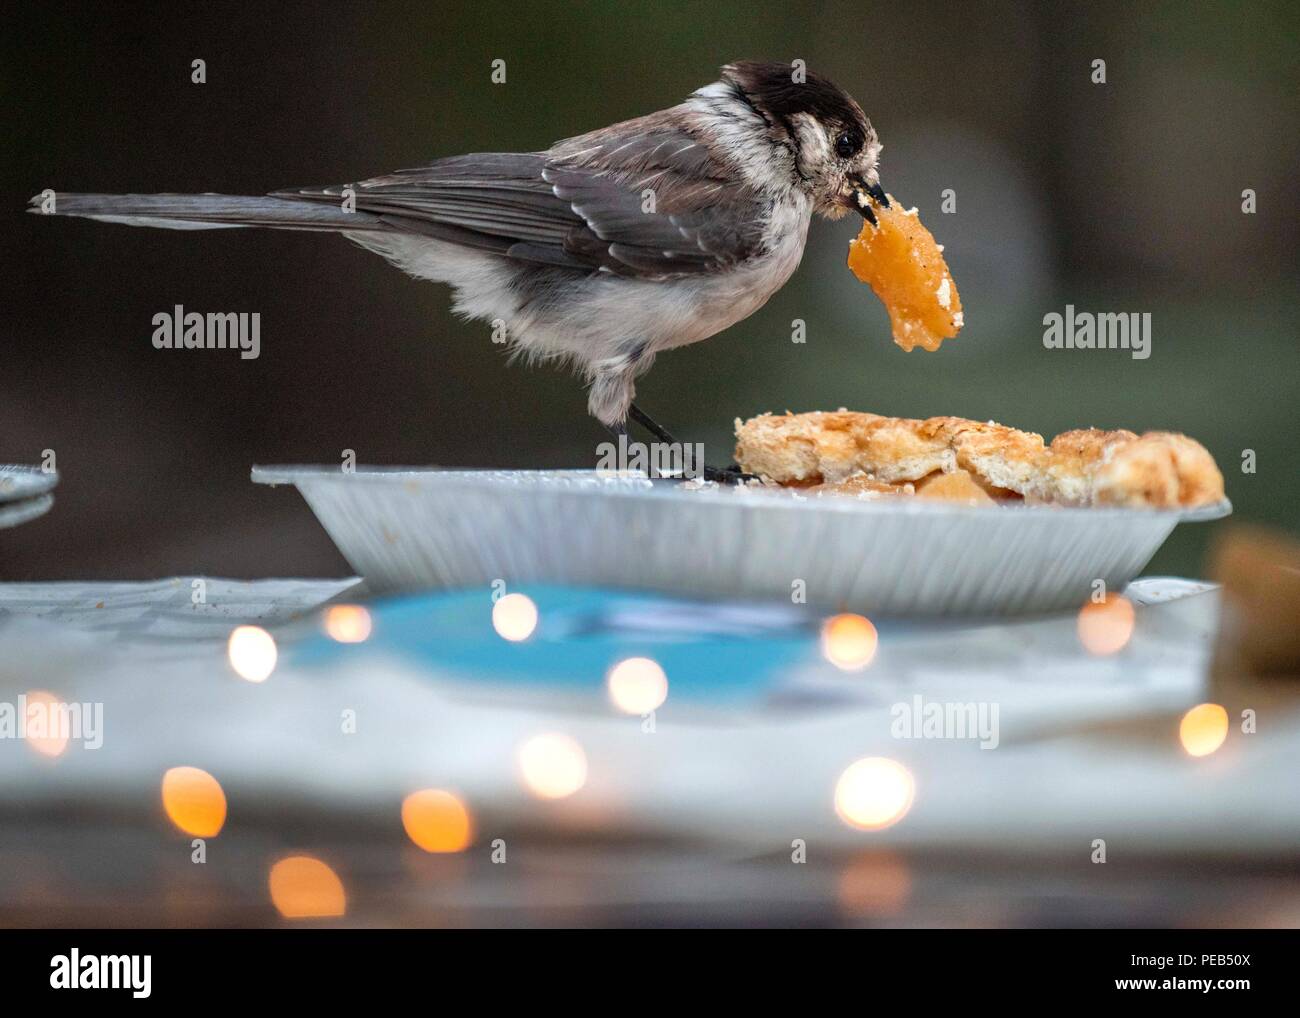 Oakridge Oregon Usa 12th Aug 2018 A Gray Jay Feasts On An Apple Pie Left Out At A Campsite Along Waldo Lake Near Oakridge In The Willamette National Forest Gray Jays Are